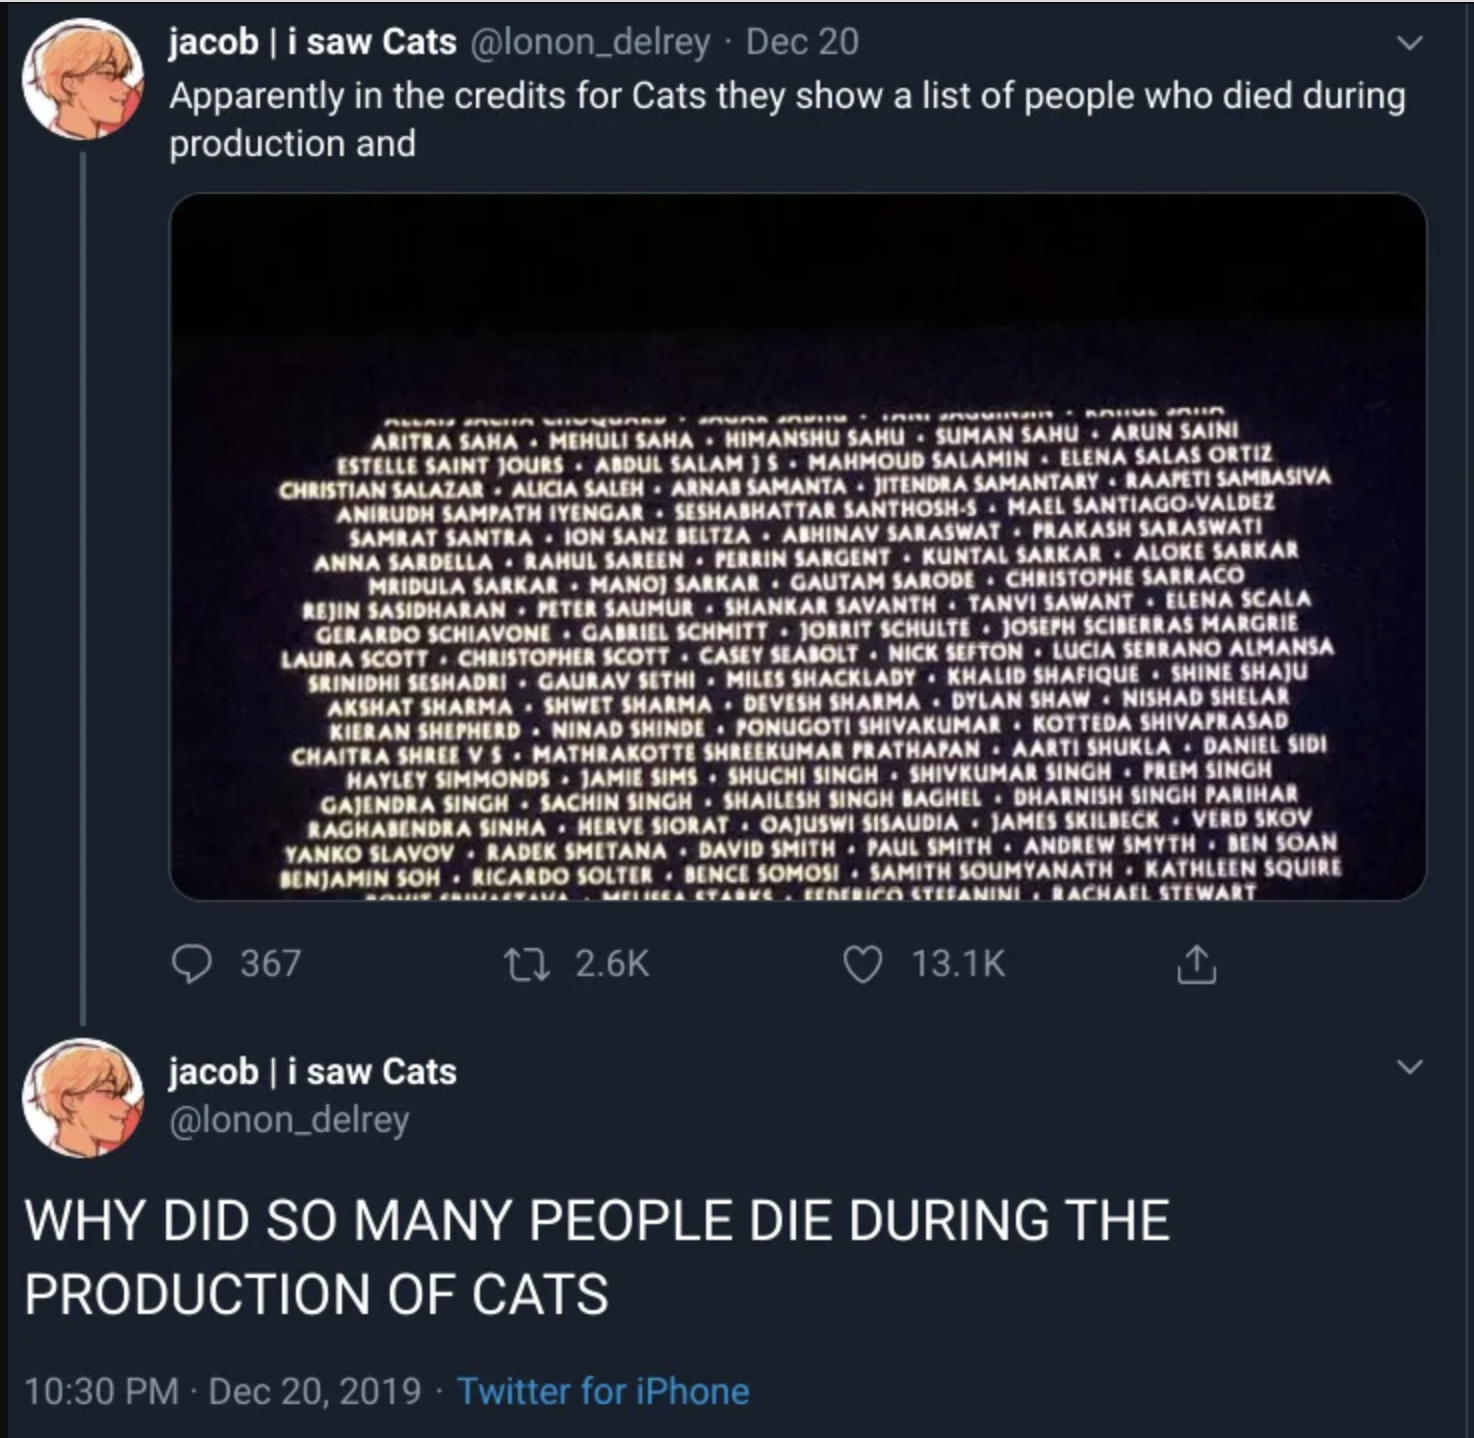 A tweet asking why so many died during production